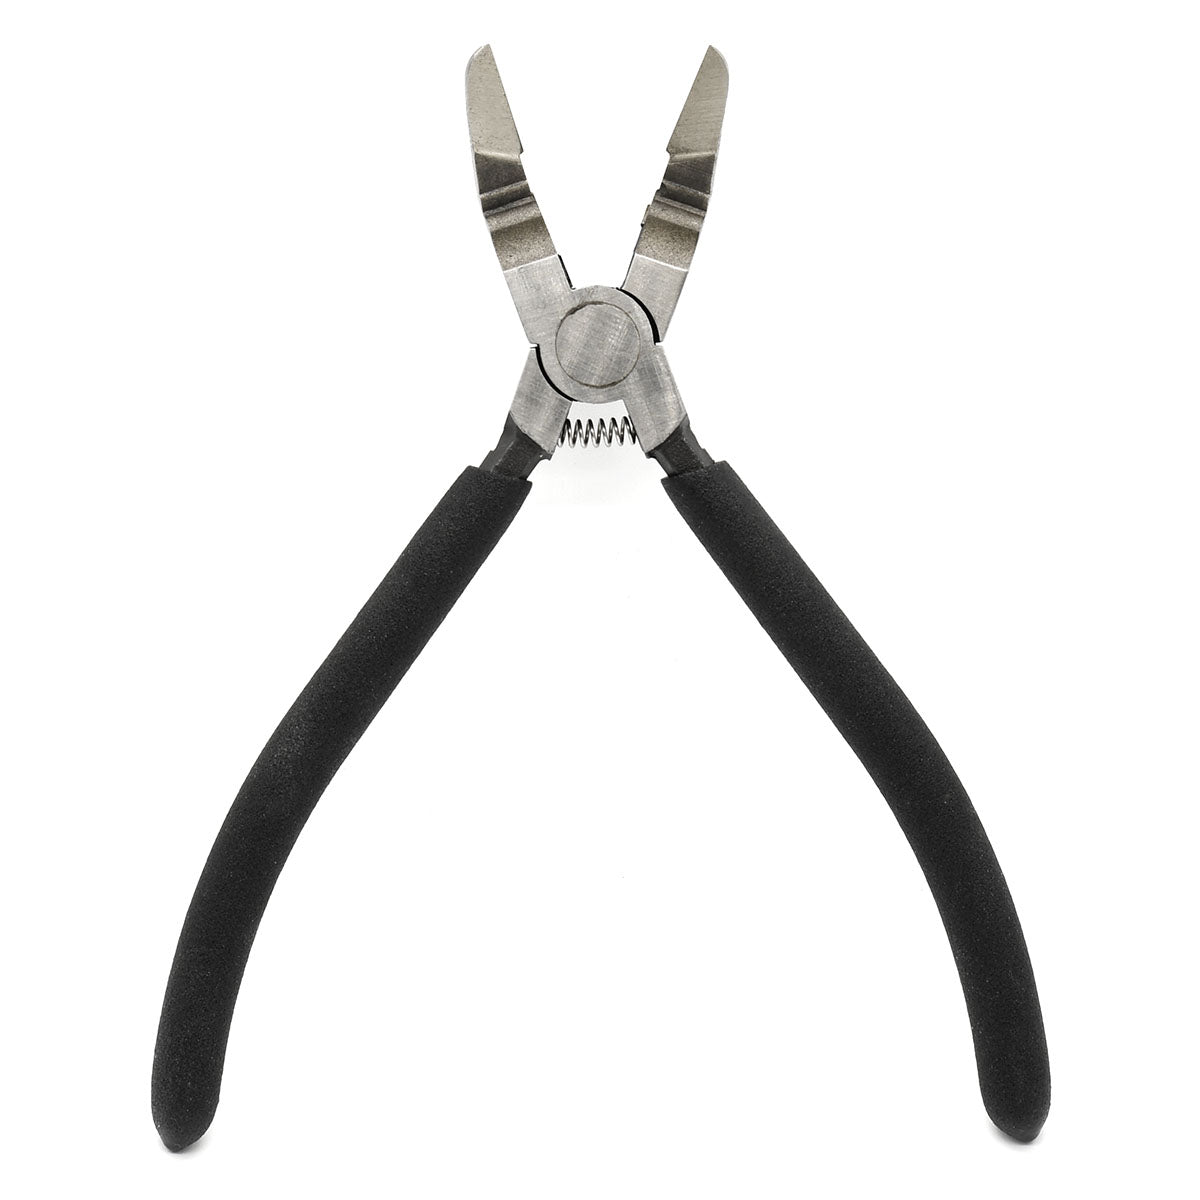 Proprietary Removal Pliers for locked prefilled cartridge tops